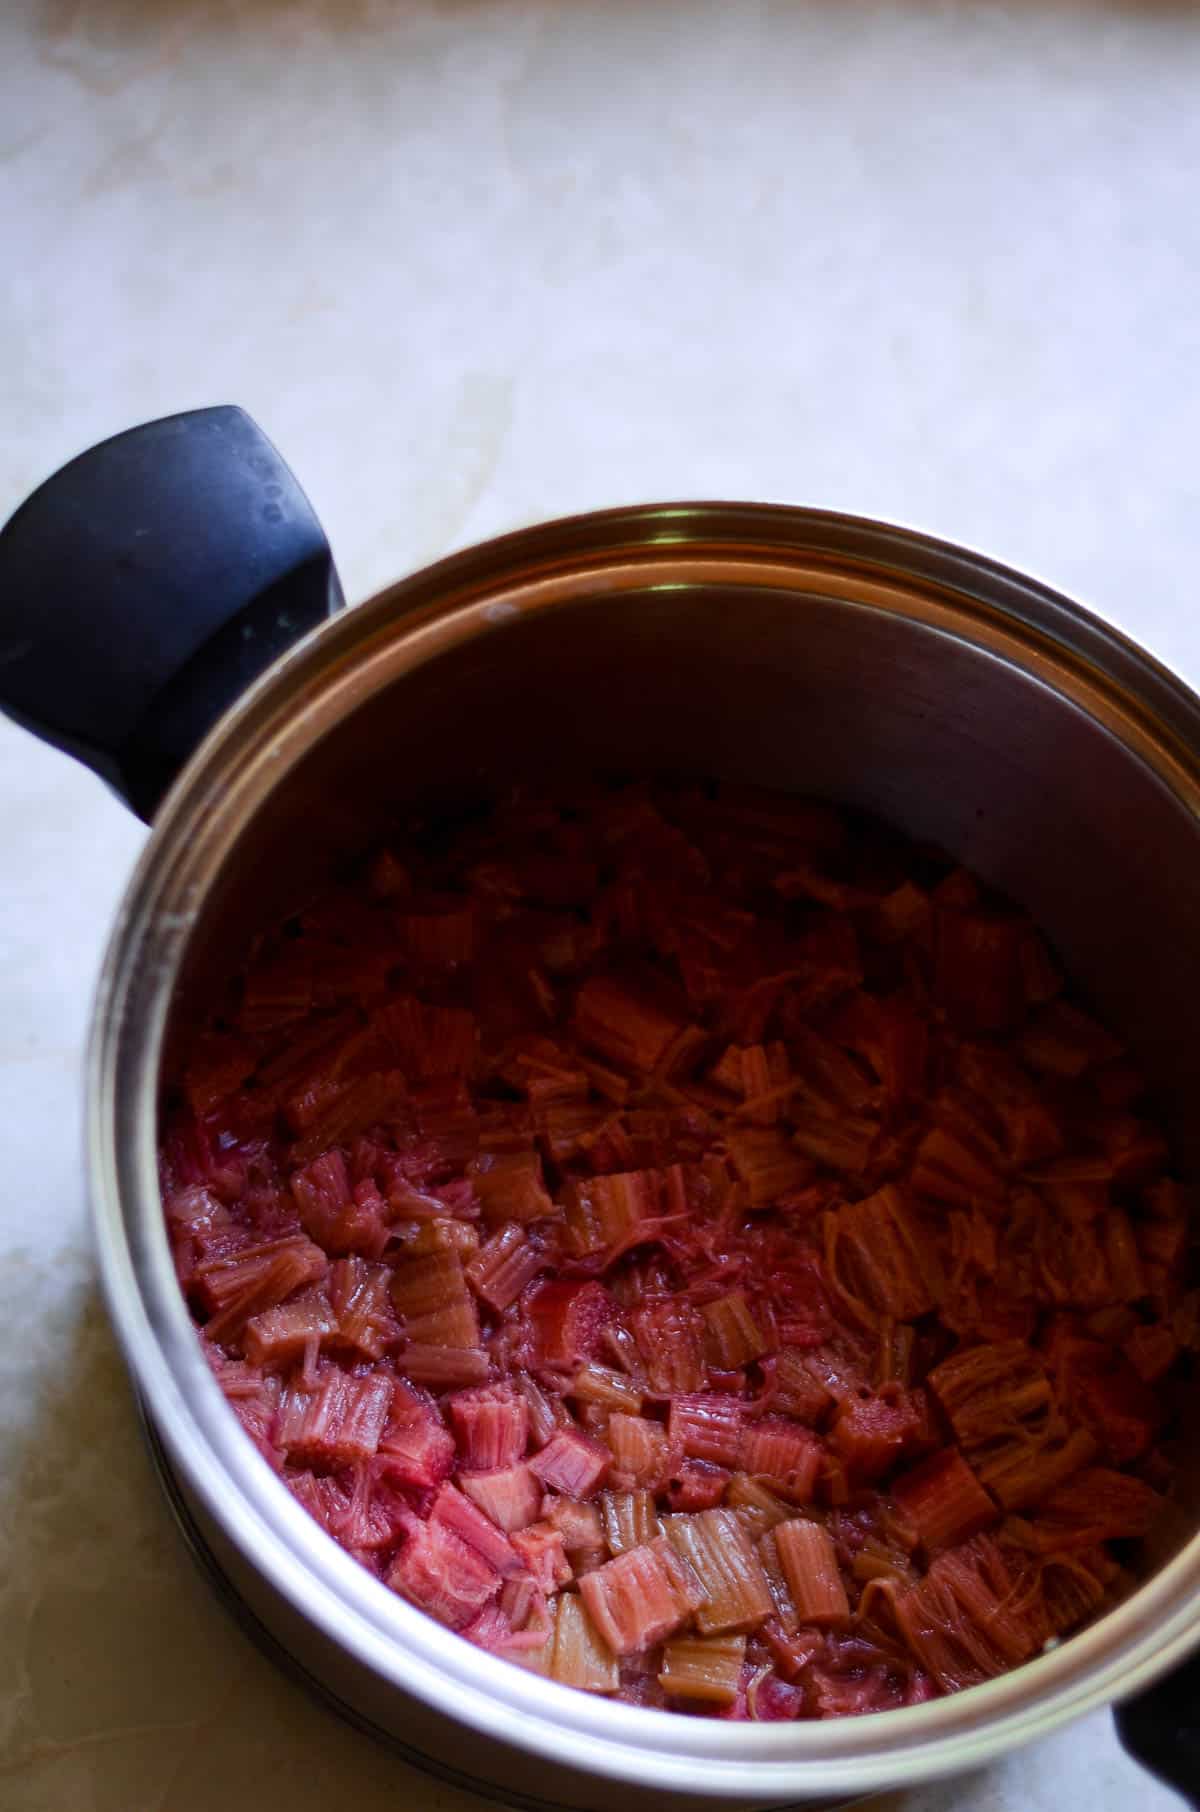 Chopped rhubarb in a pot cooked.